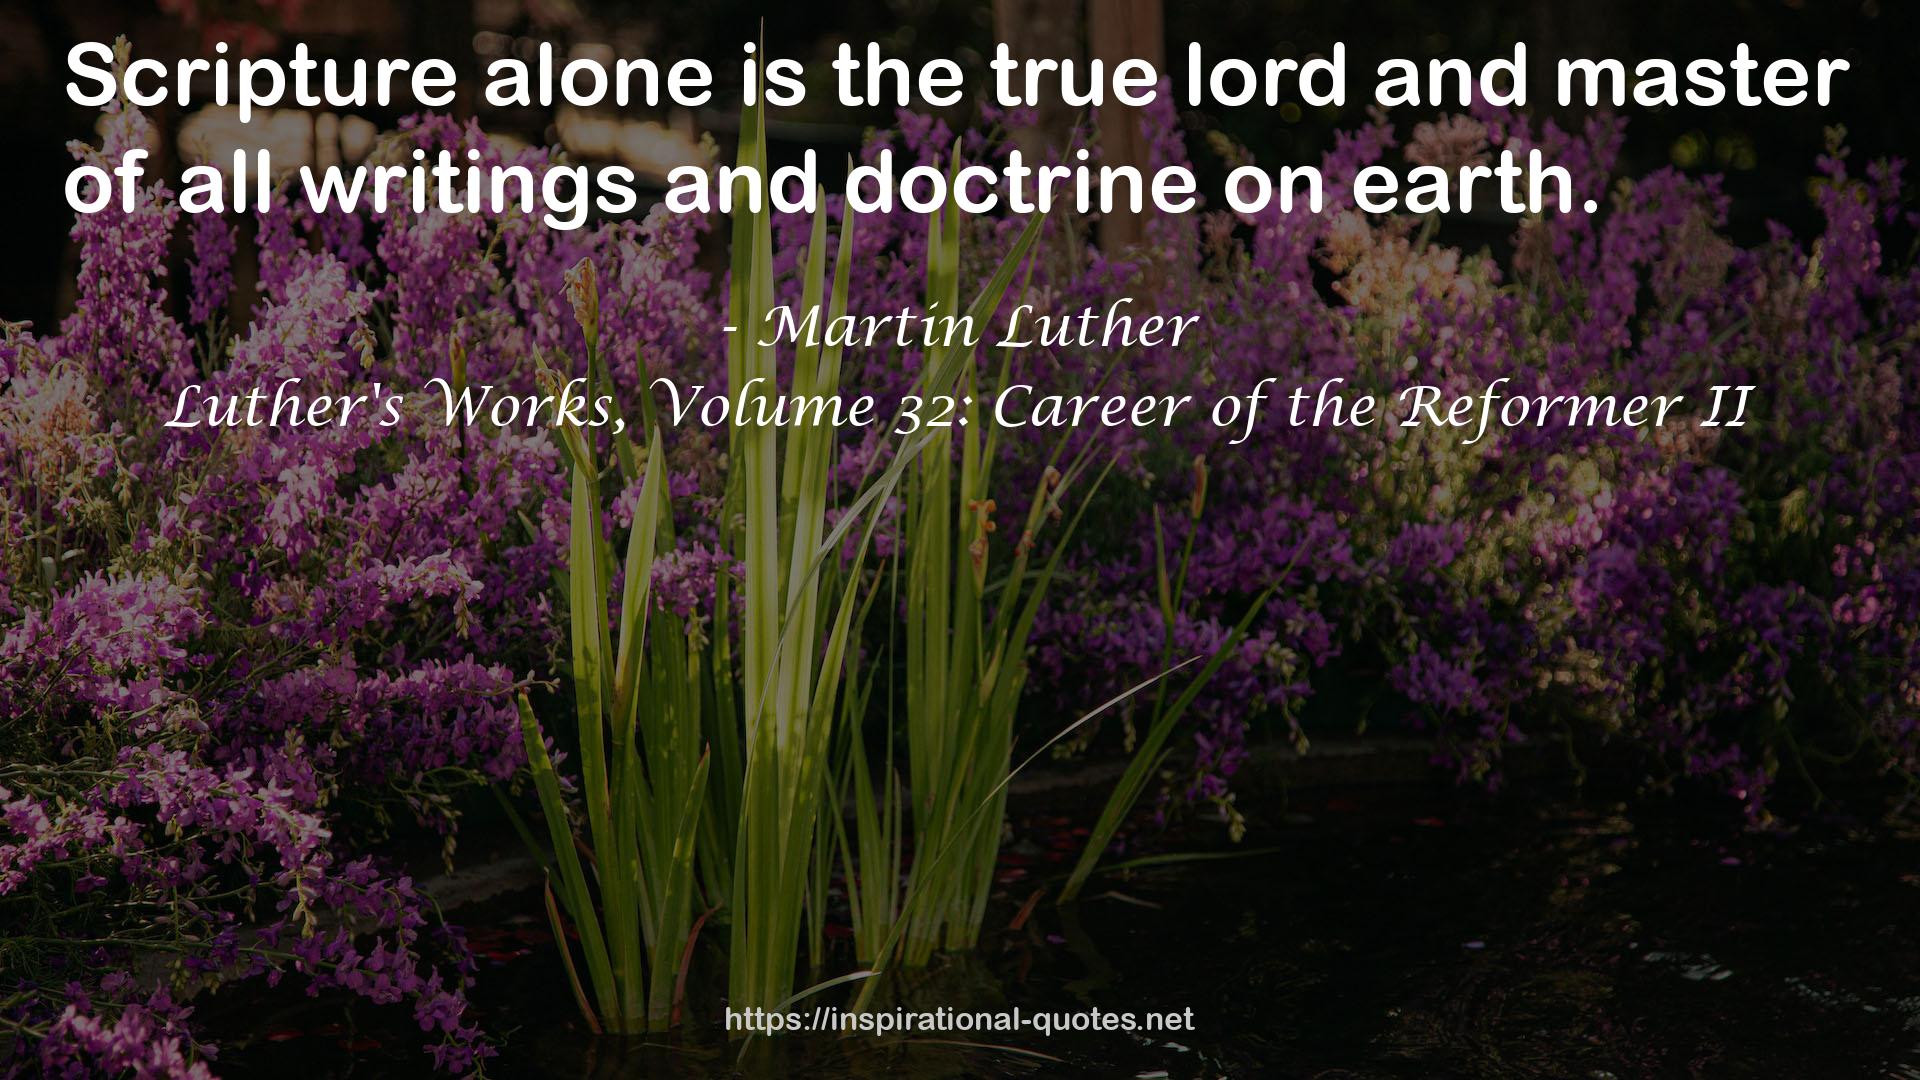 Luther's Works, Volume 32: Career of the Reformer II QUOTES